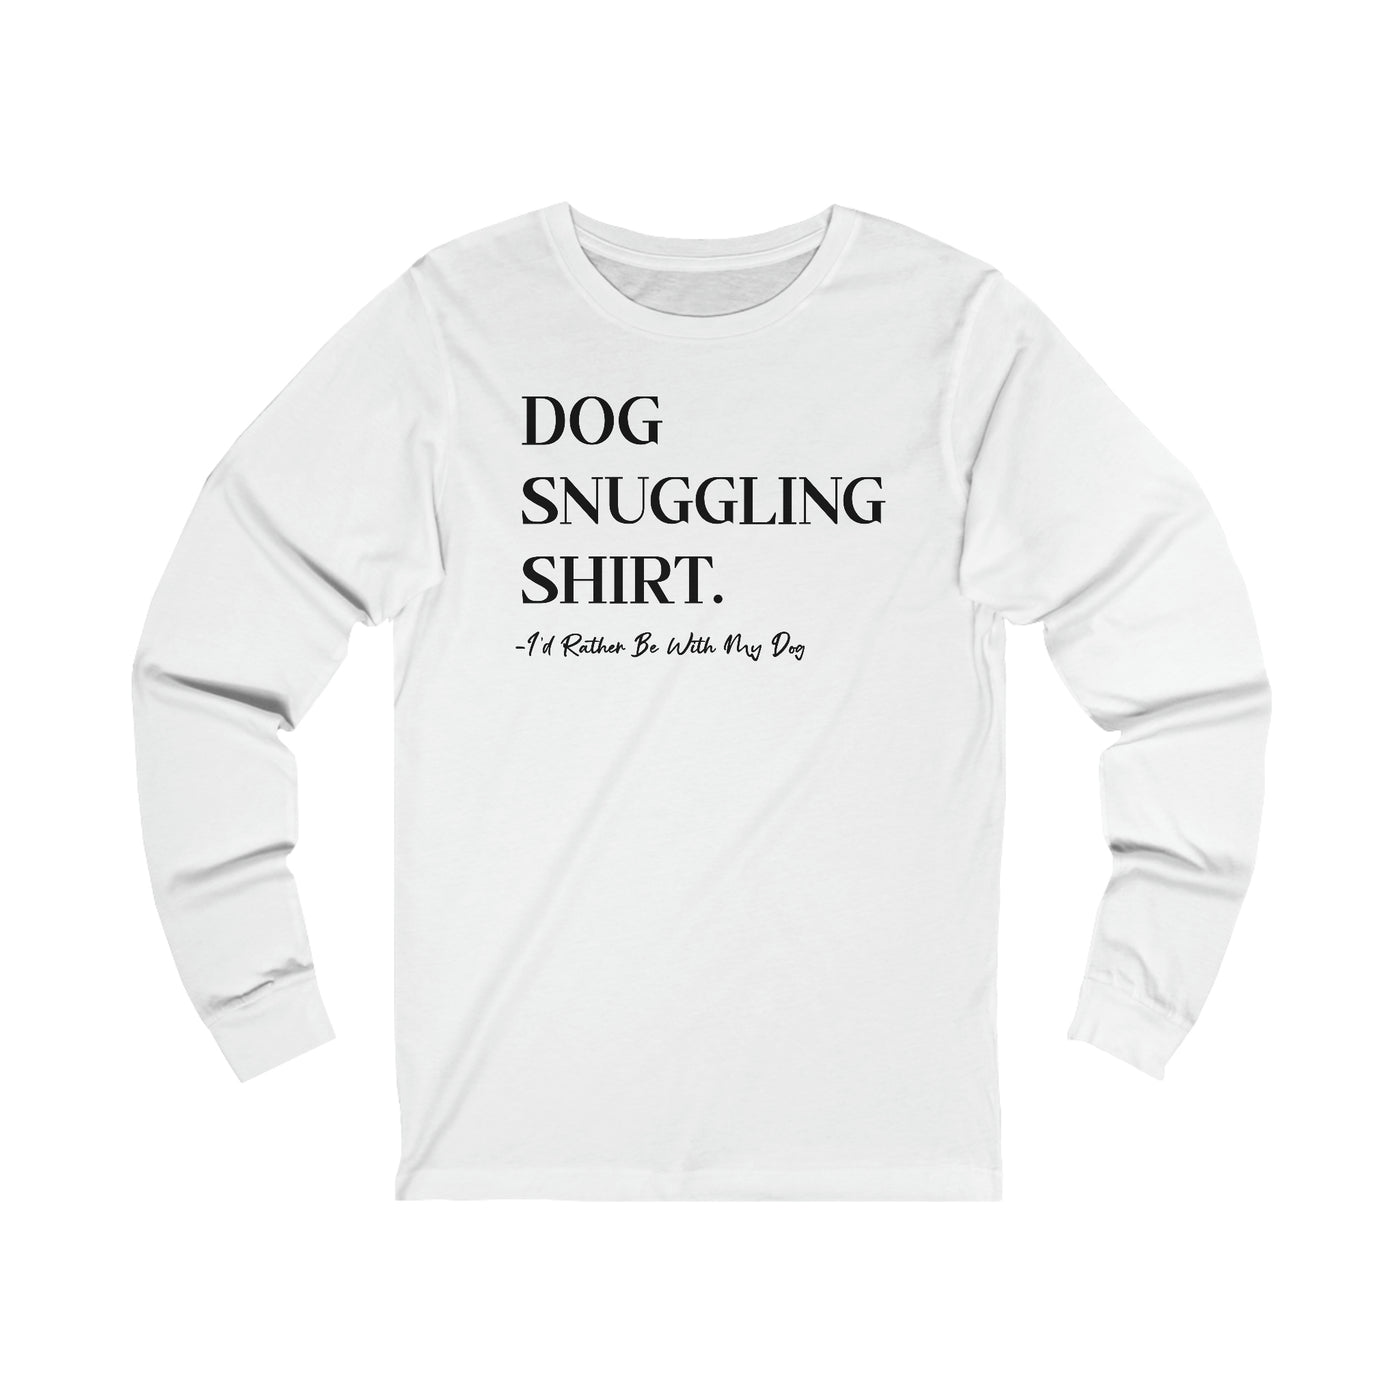 Dog Snuggling Shirt I'd Rather Be With My Dog Black Print Longsleeve